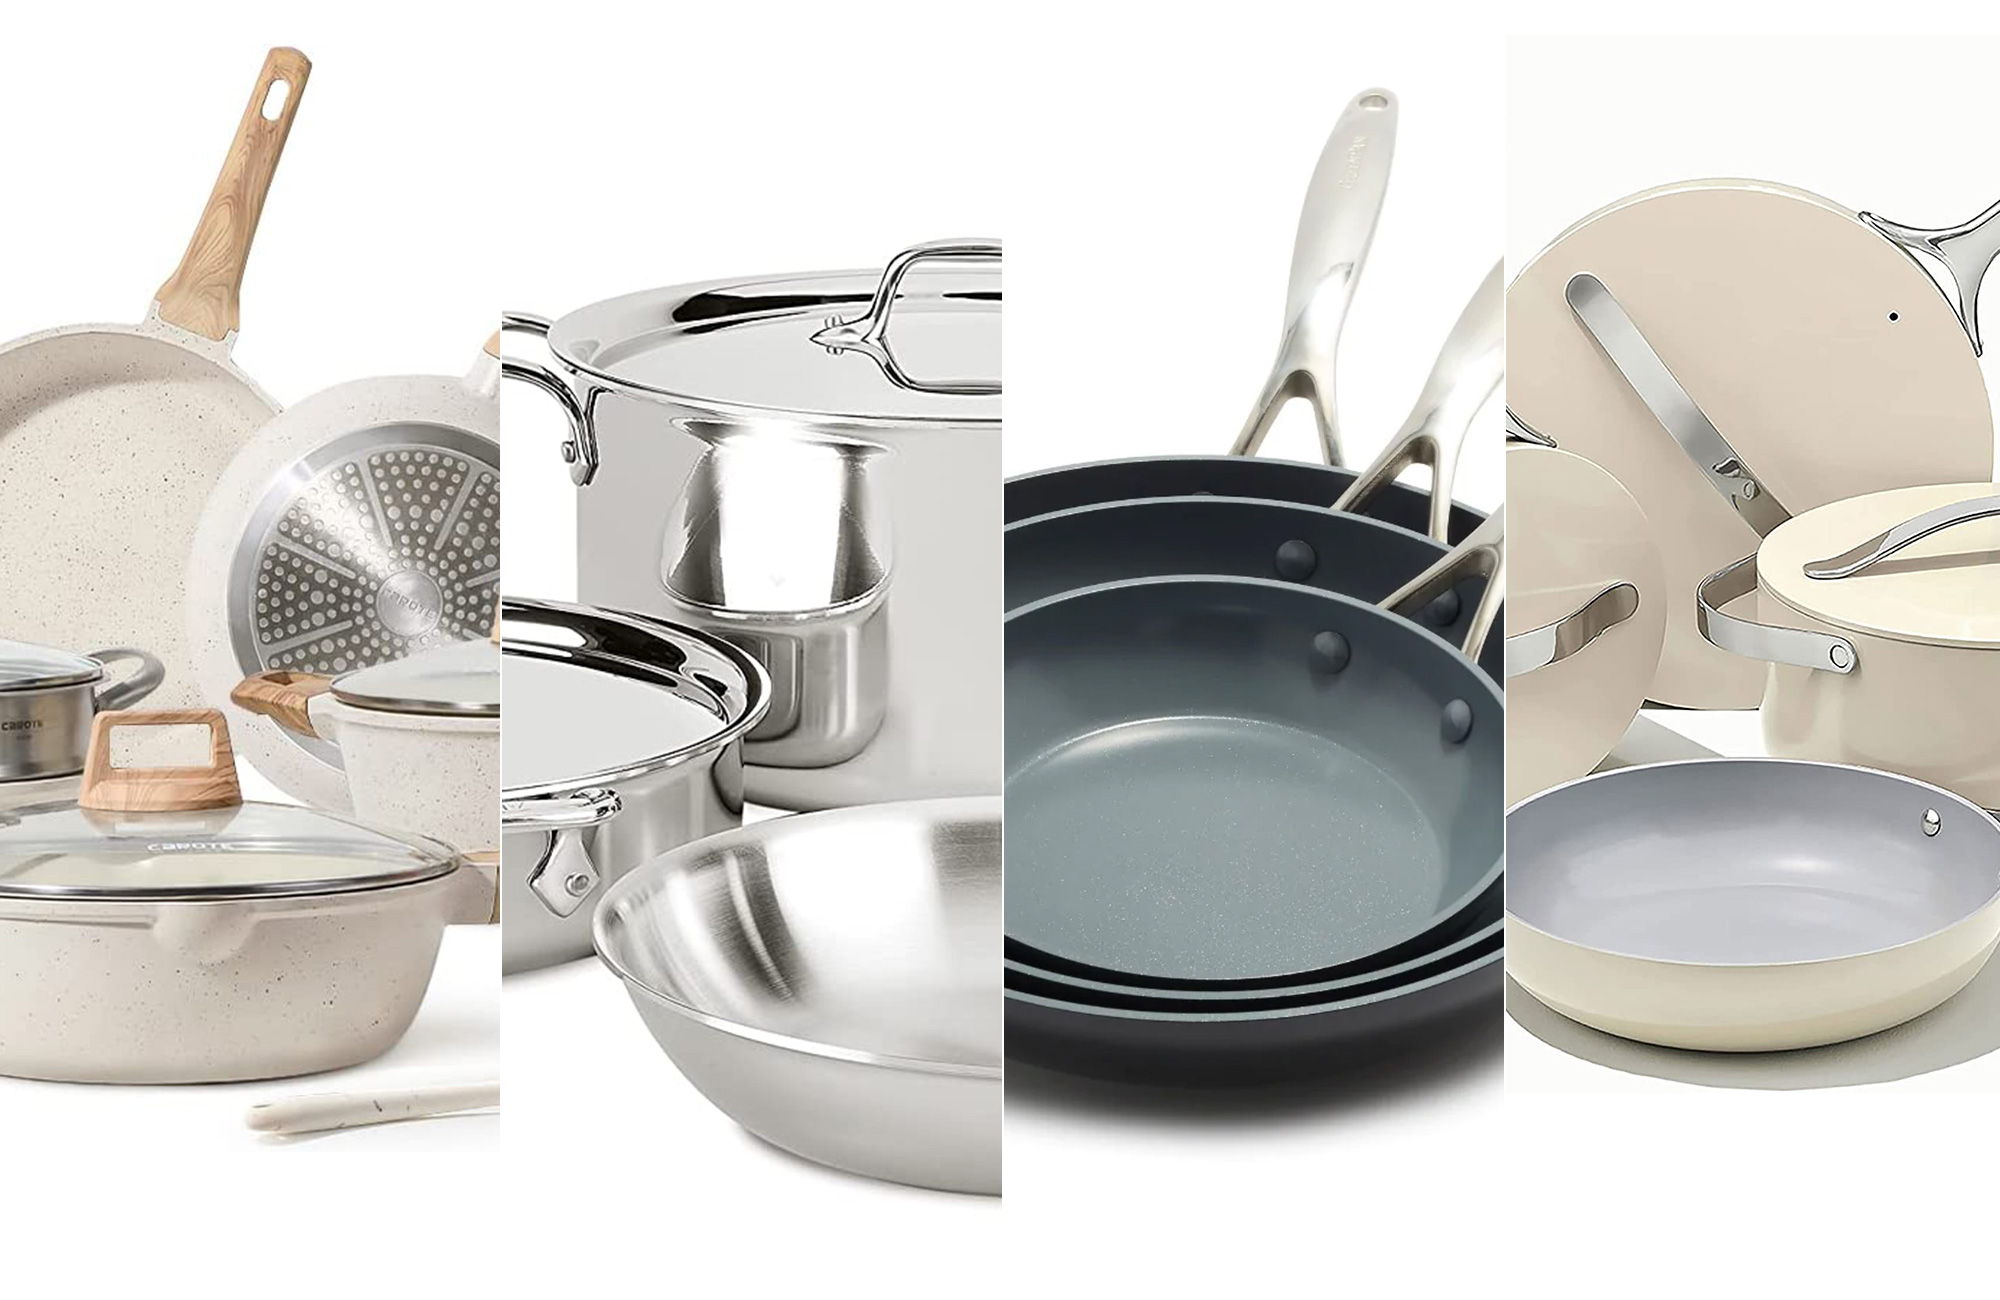 Induction Cookware: Finding the Right Pots and Pans